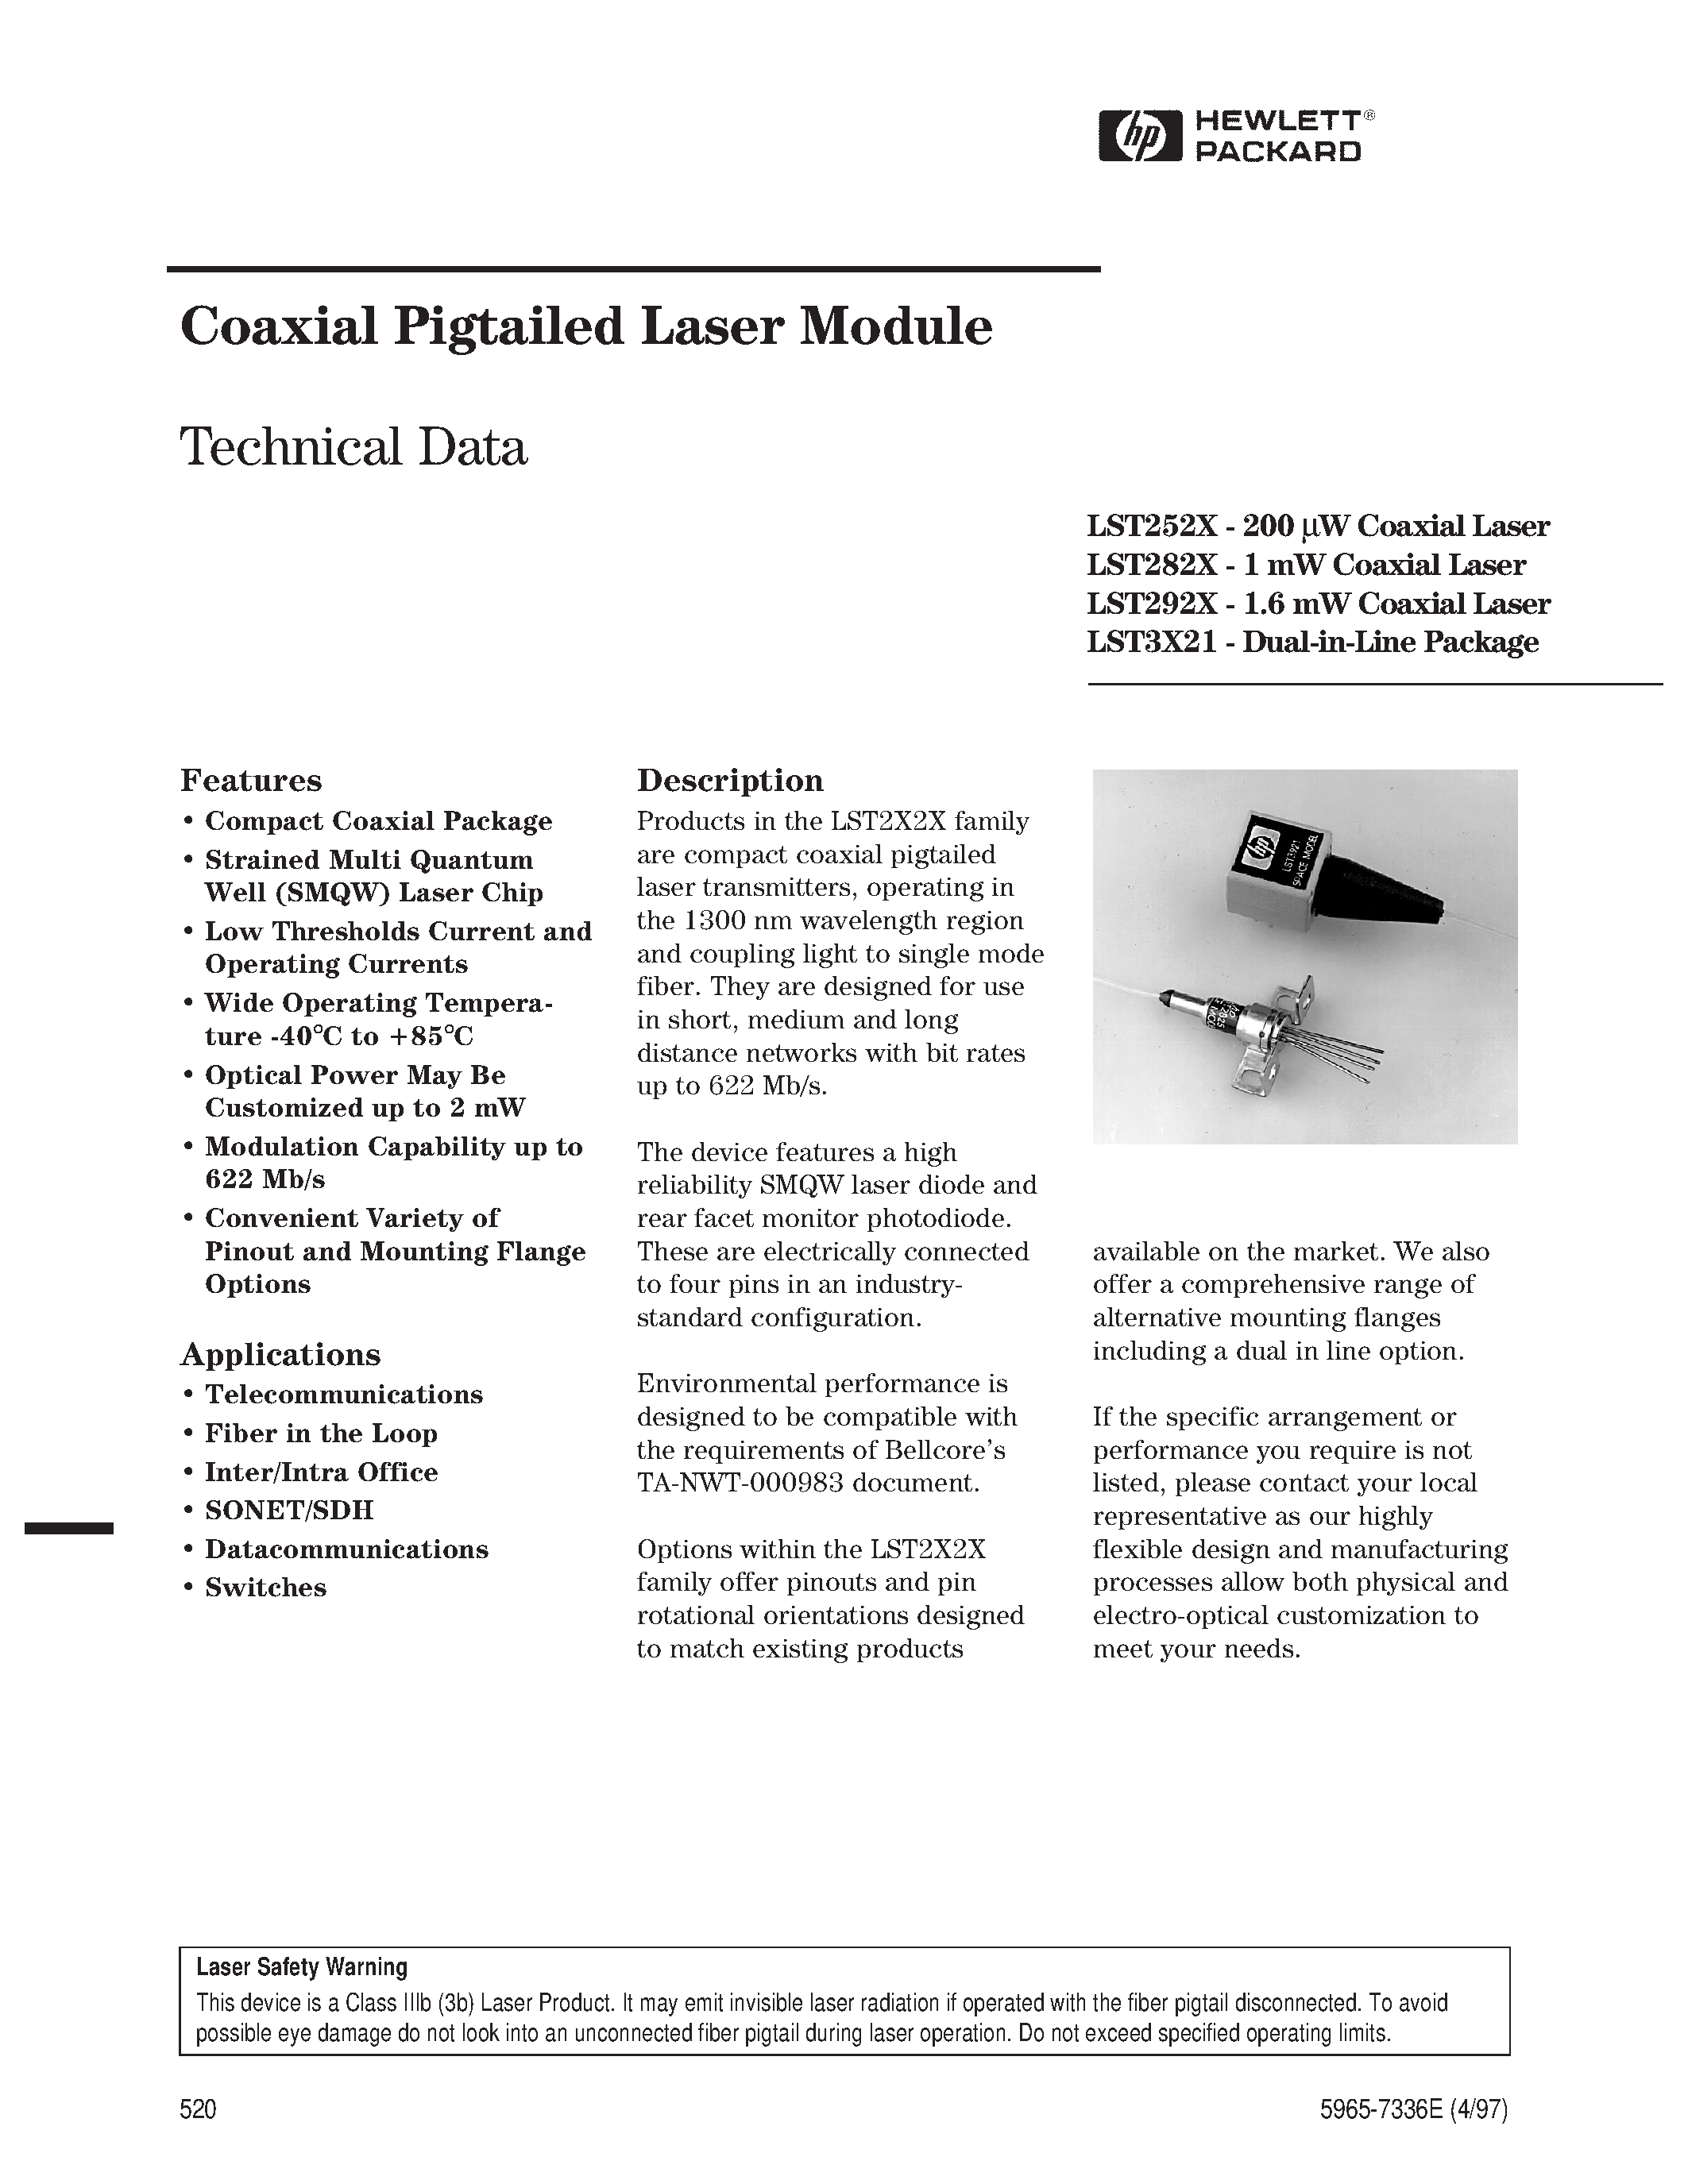 Даташит LST2925-S4-T-SC - Coaxial Pigtailed Laser Module страница 1